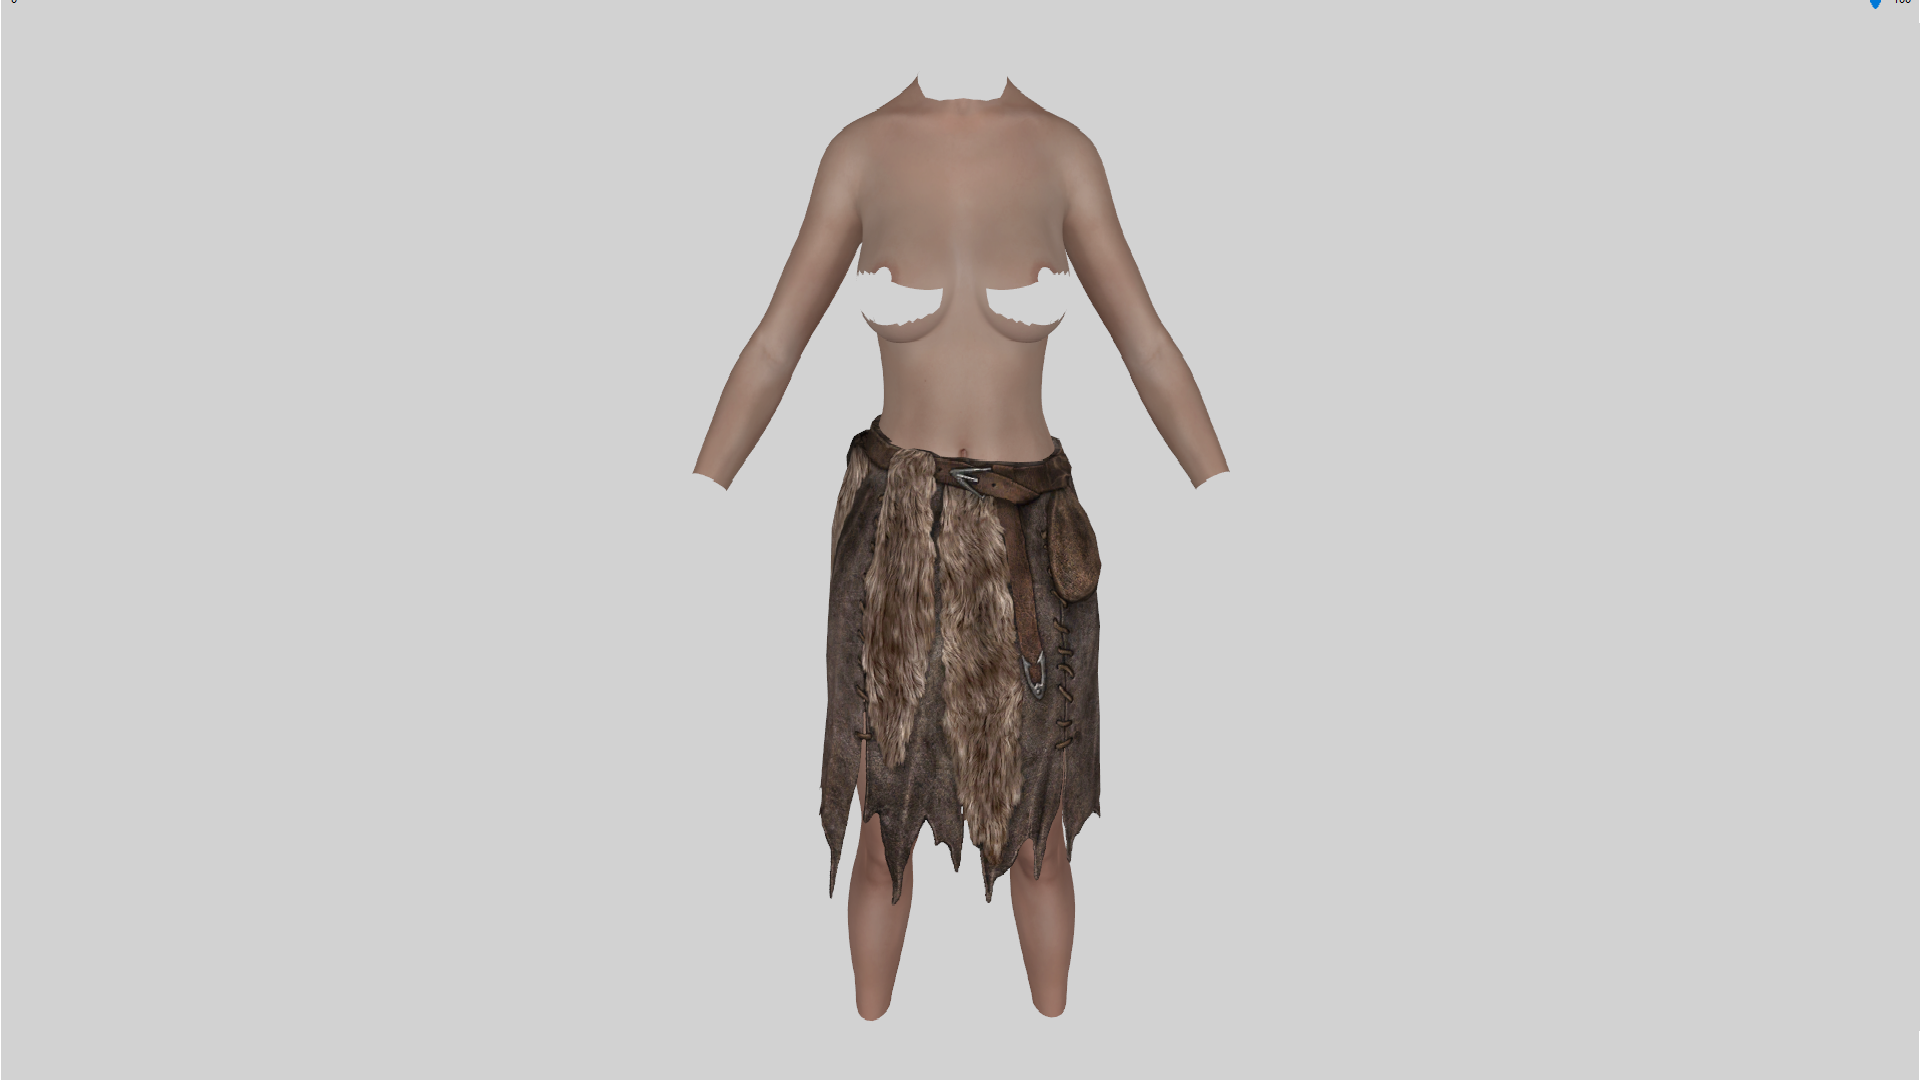 Vanilla Body Reference for Outfit Studio BodySlide at Skyrim